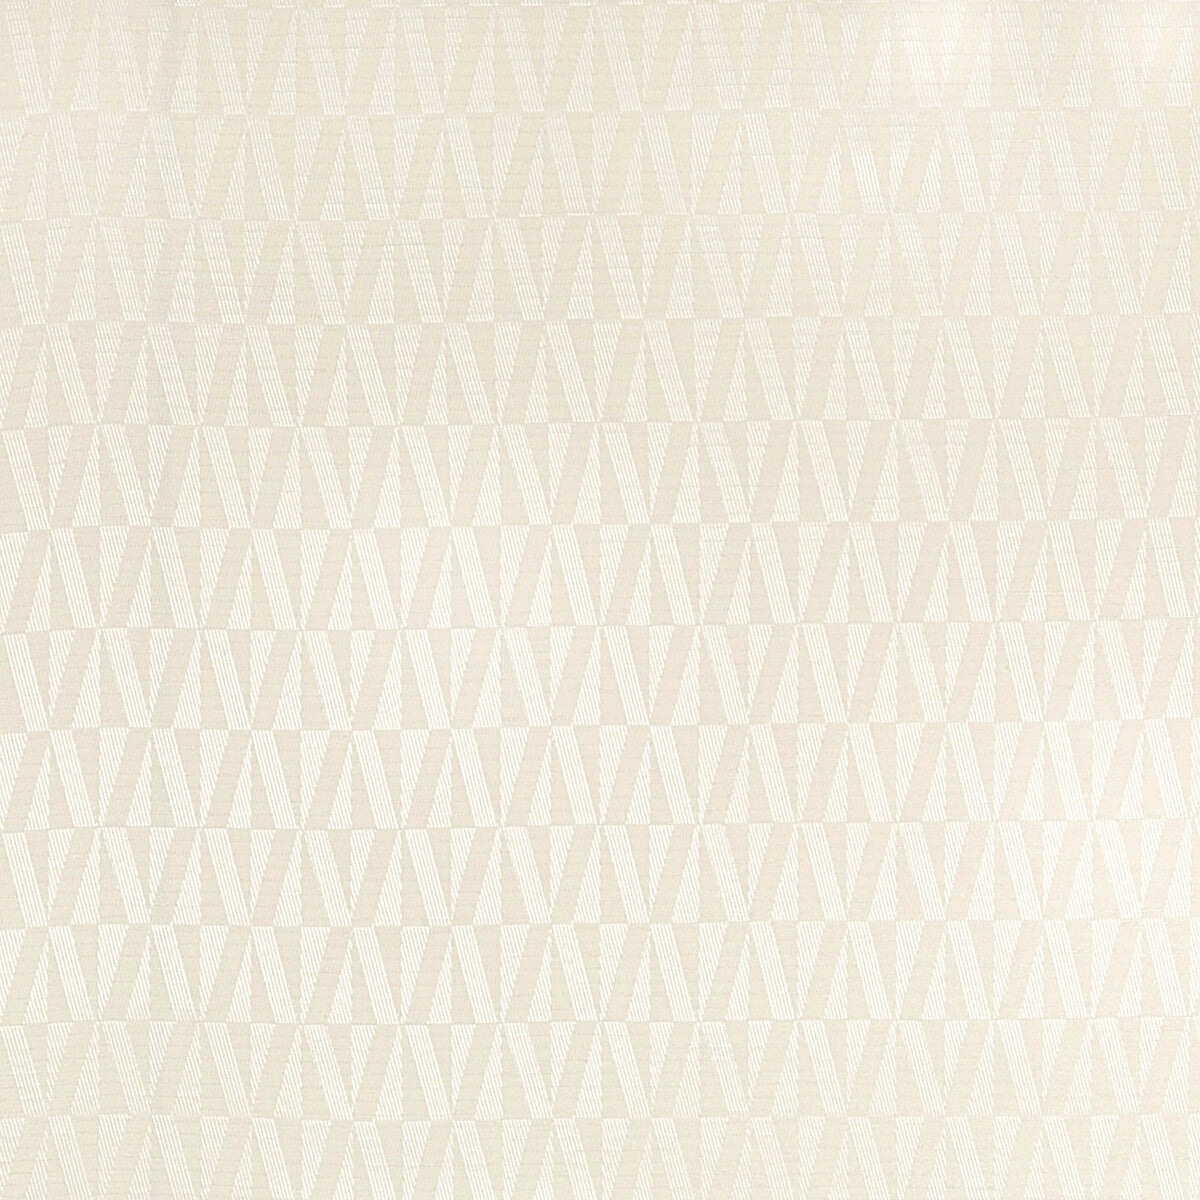 Payton fabric in papyrus color - pattern 4656.1.0 - by Kravet Contract